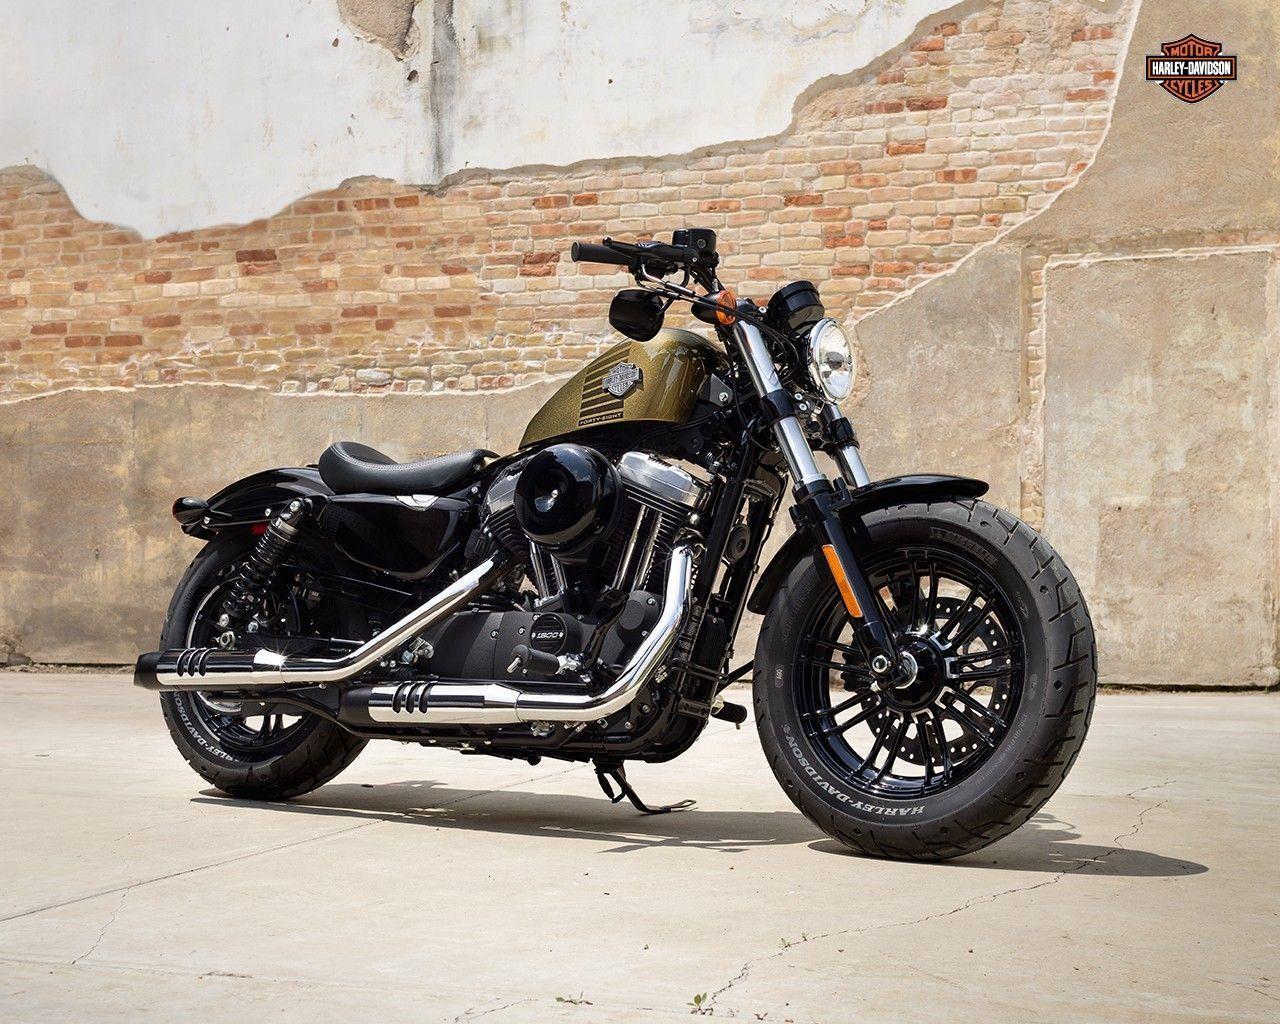 Harley Davidson Upgrades The 2016 Forty Eight